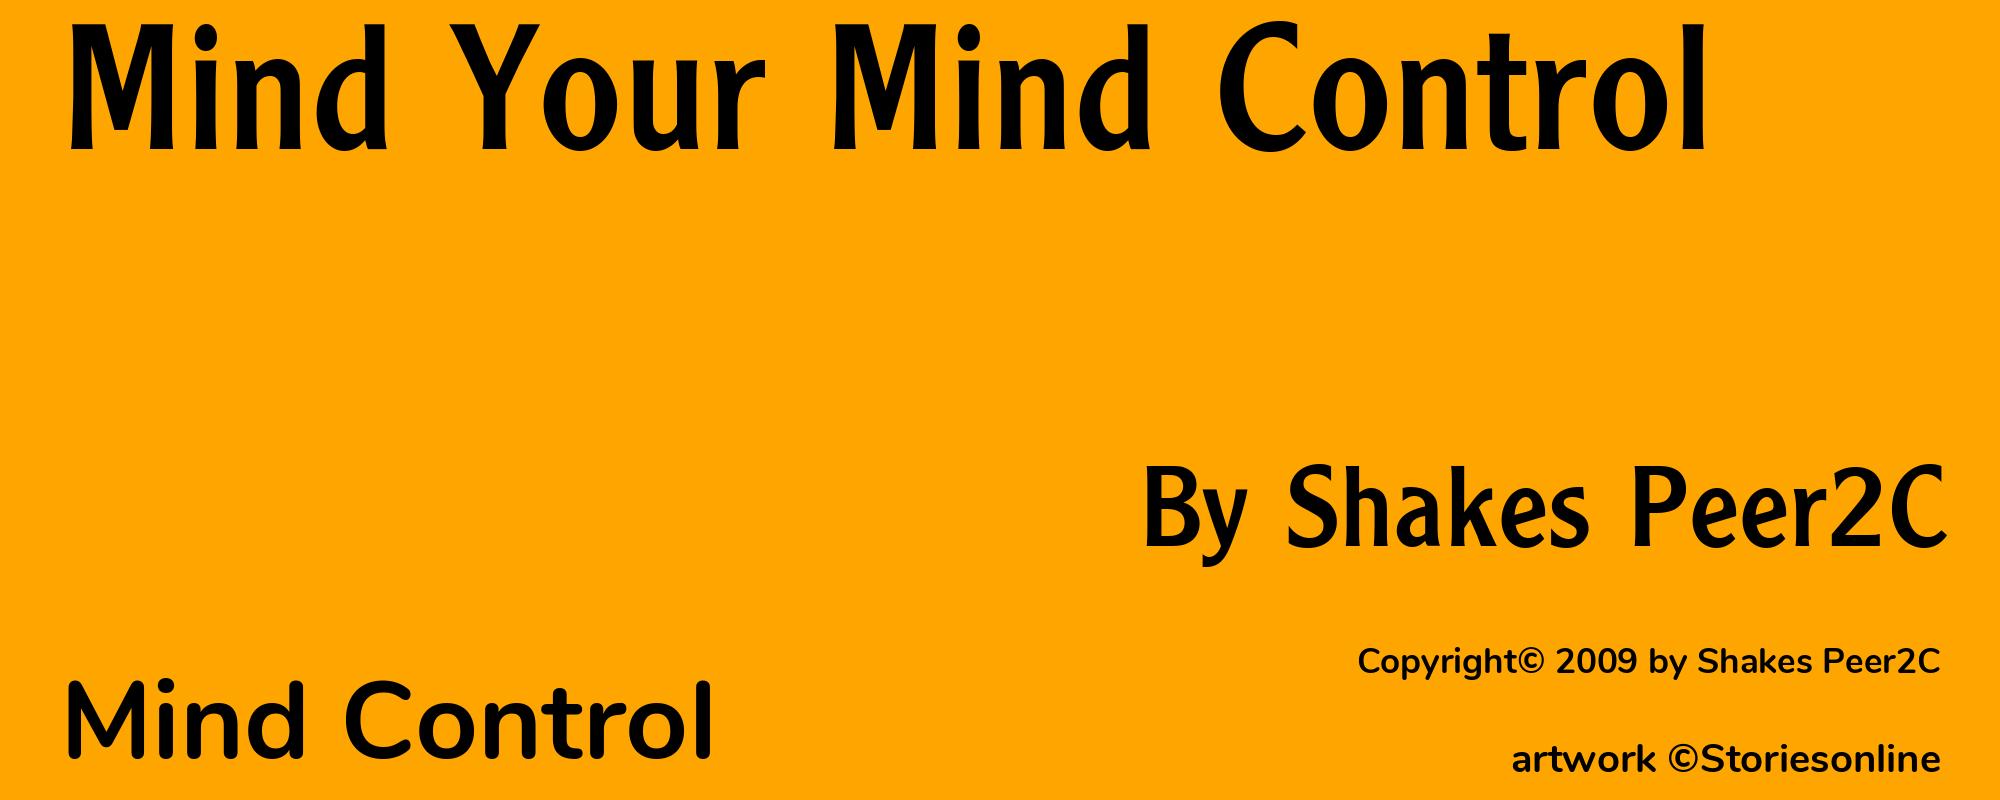 Mind Your Mind Control - Cover